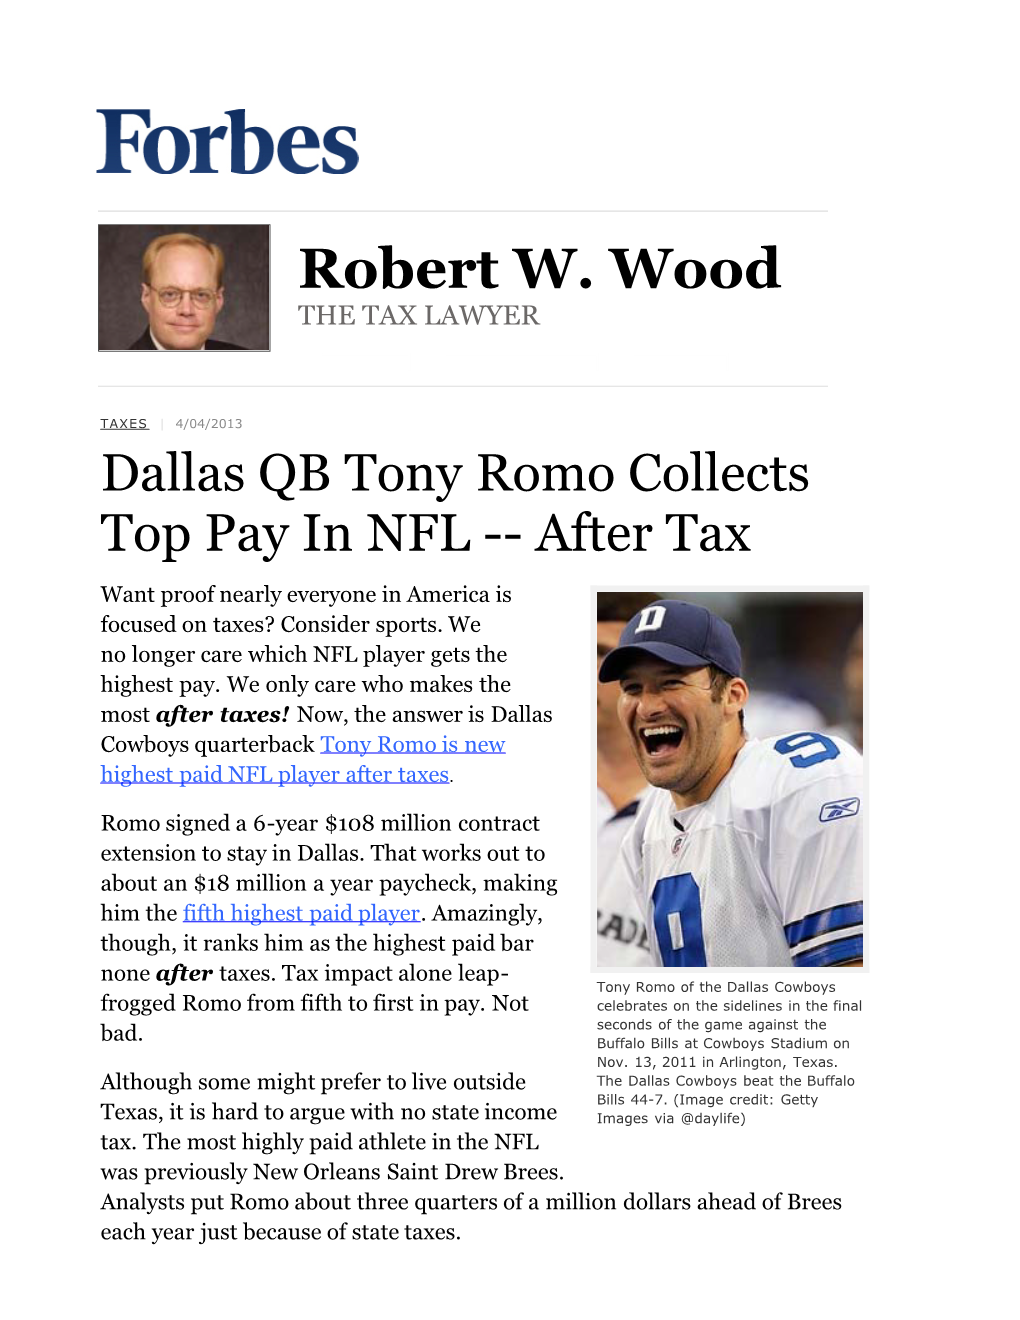 Dallas QB Tony Romo Collects Top Pay in NFL -- After Tax Want Proof Nearly Everyone in America Is Focused on Taxes? Consider Sports